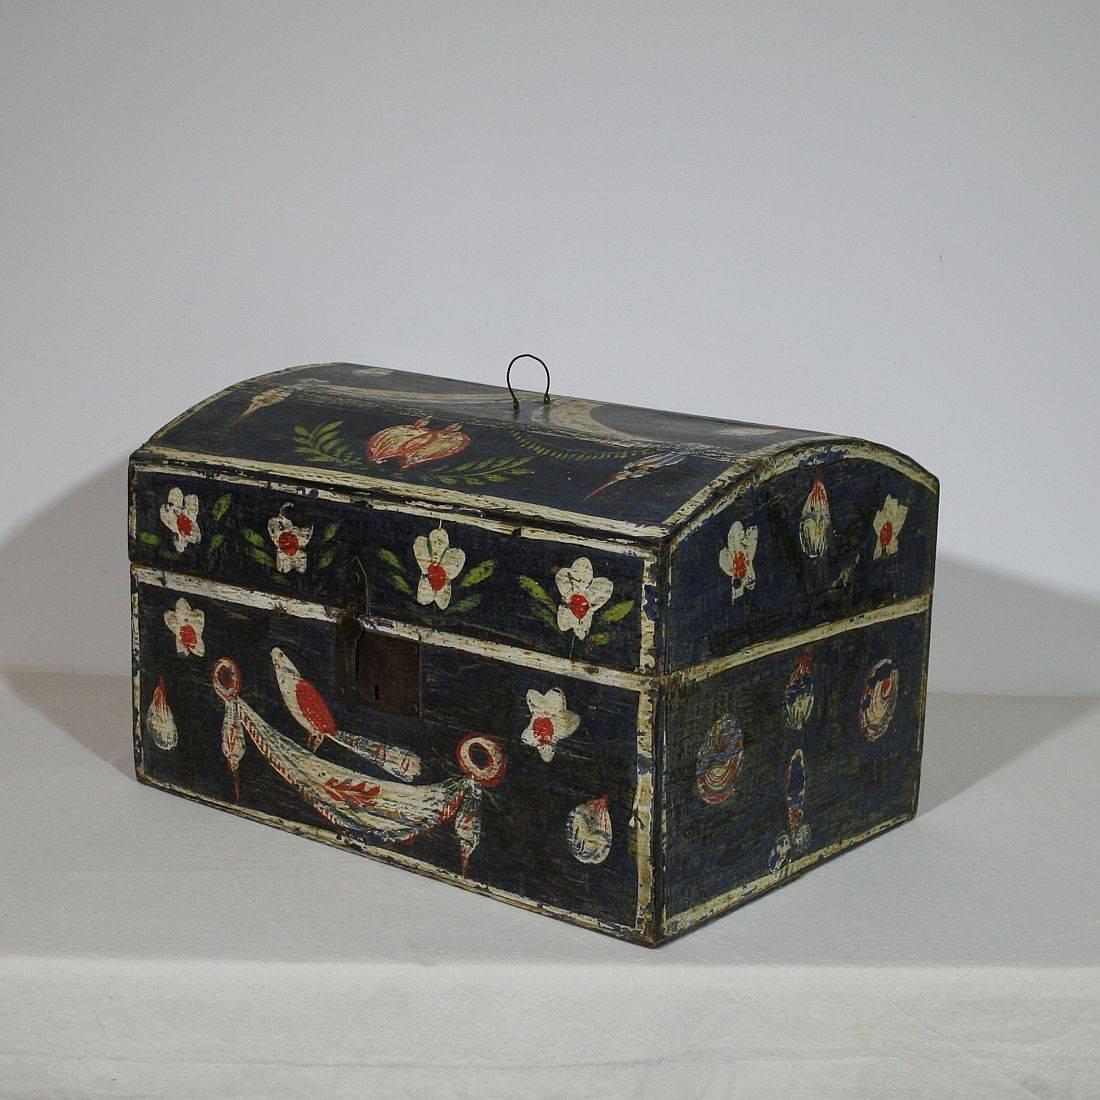 Painted 18th Century French Folk Art Weddingbox from Normandy with Hearts and Bird